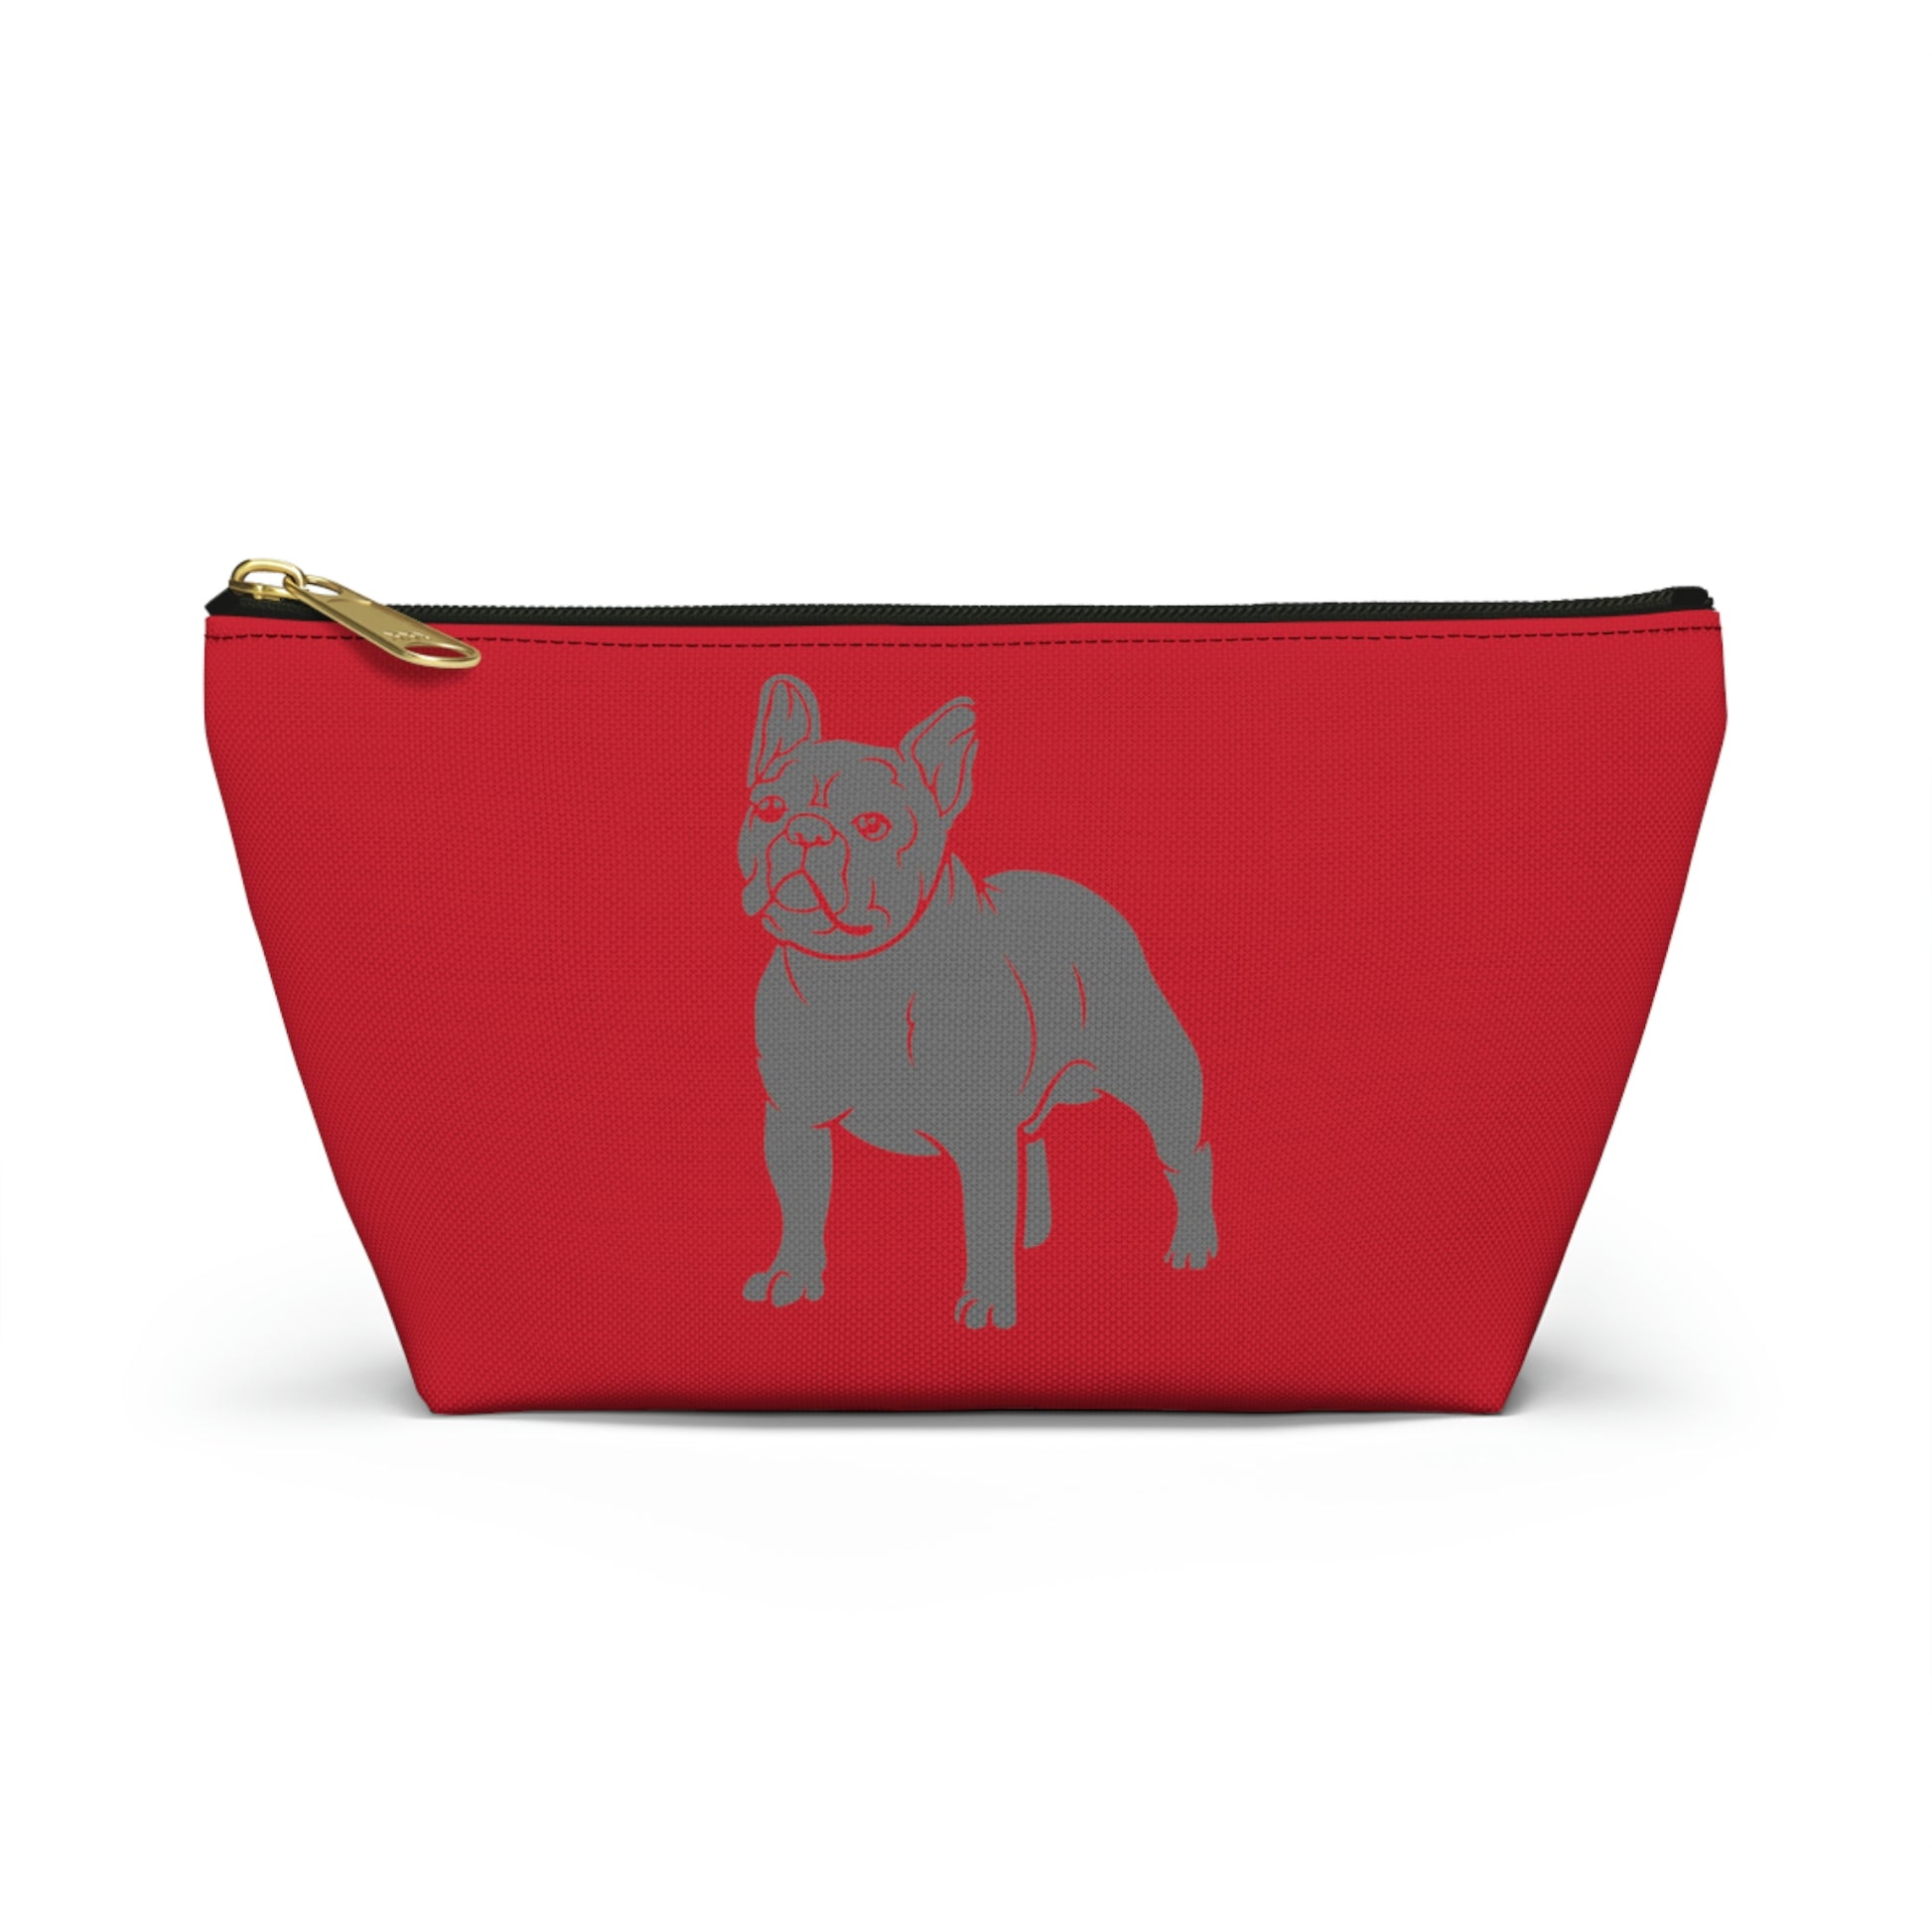 Frenchie Red Accessory Pouch With T-bottom | BKLA | shoes & accessories | backpack, hat, phone cover, tote bags, clutch bags